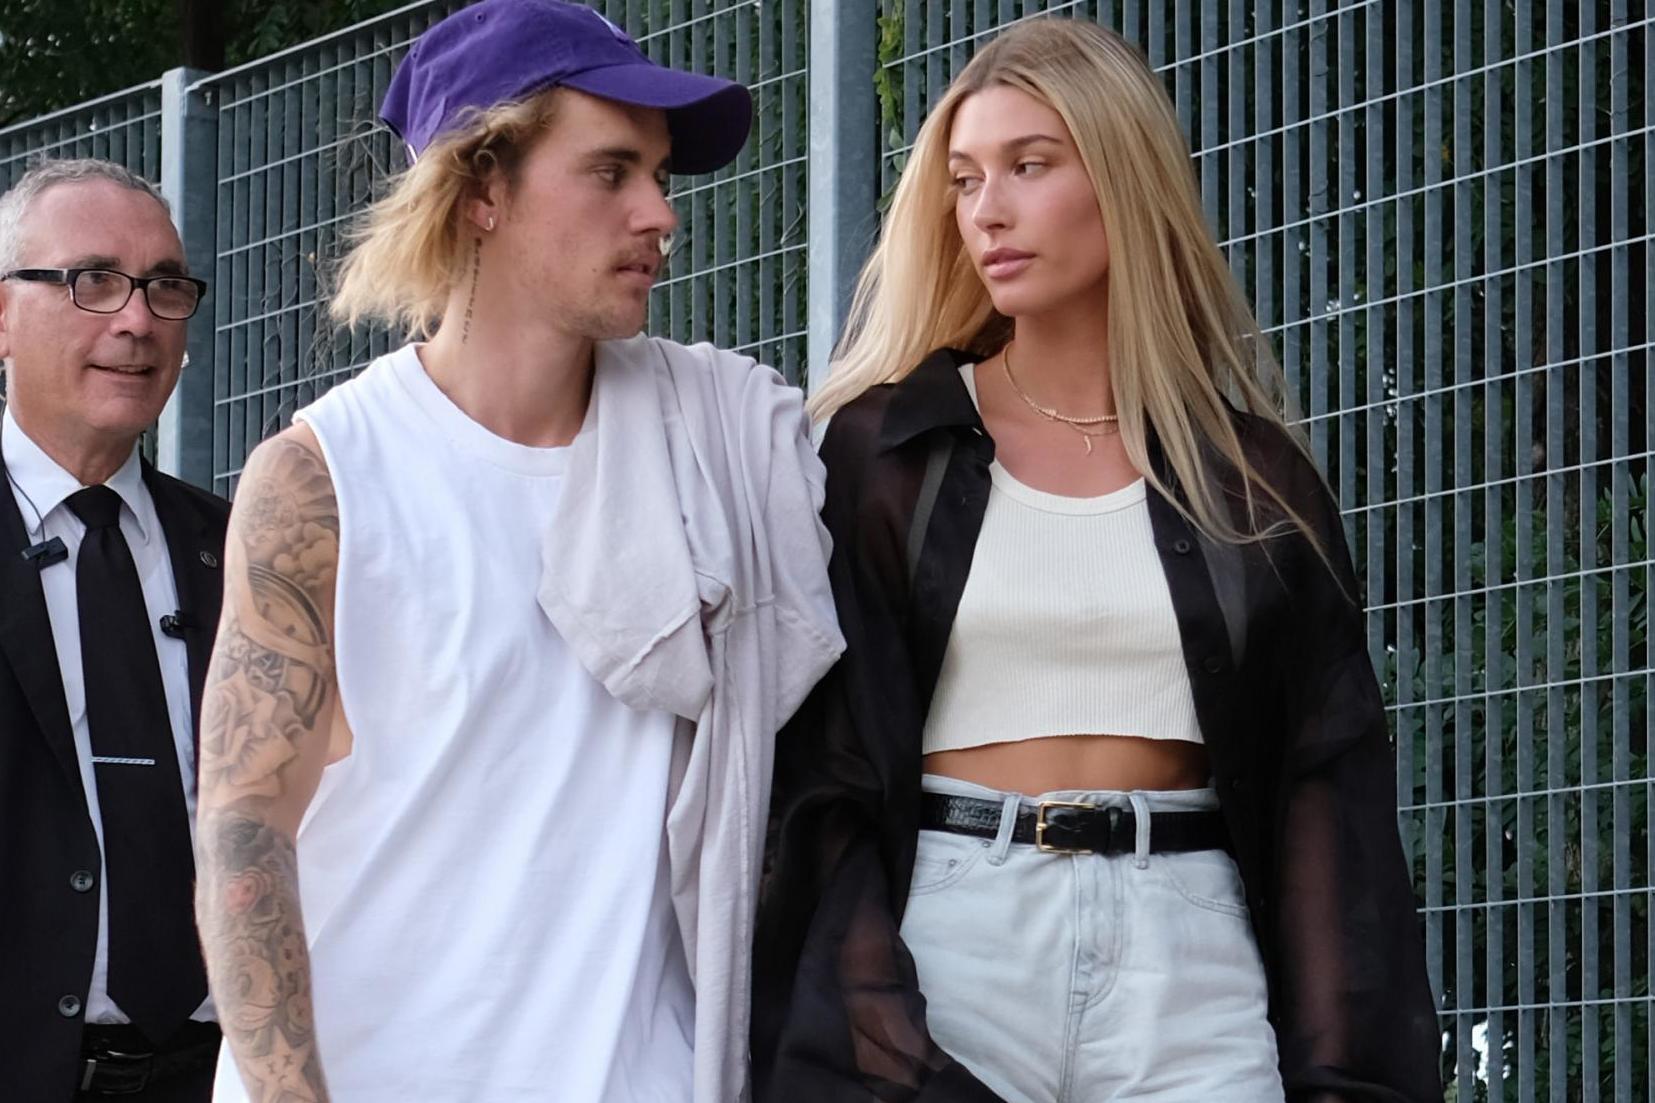 Justin Bieber apologises for 'disgusting' April Fool's Day pregnancy prank